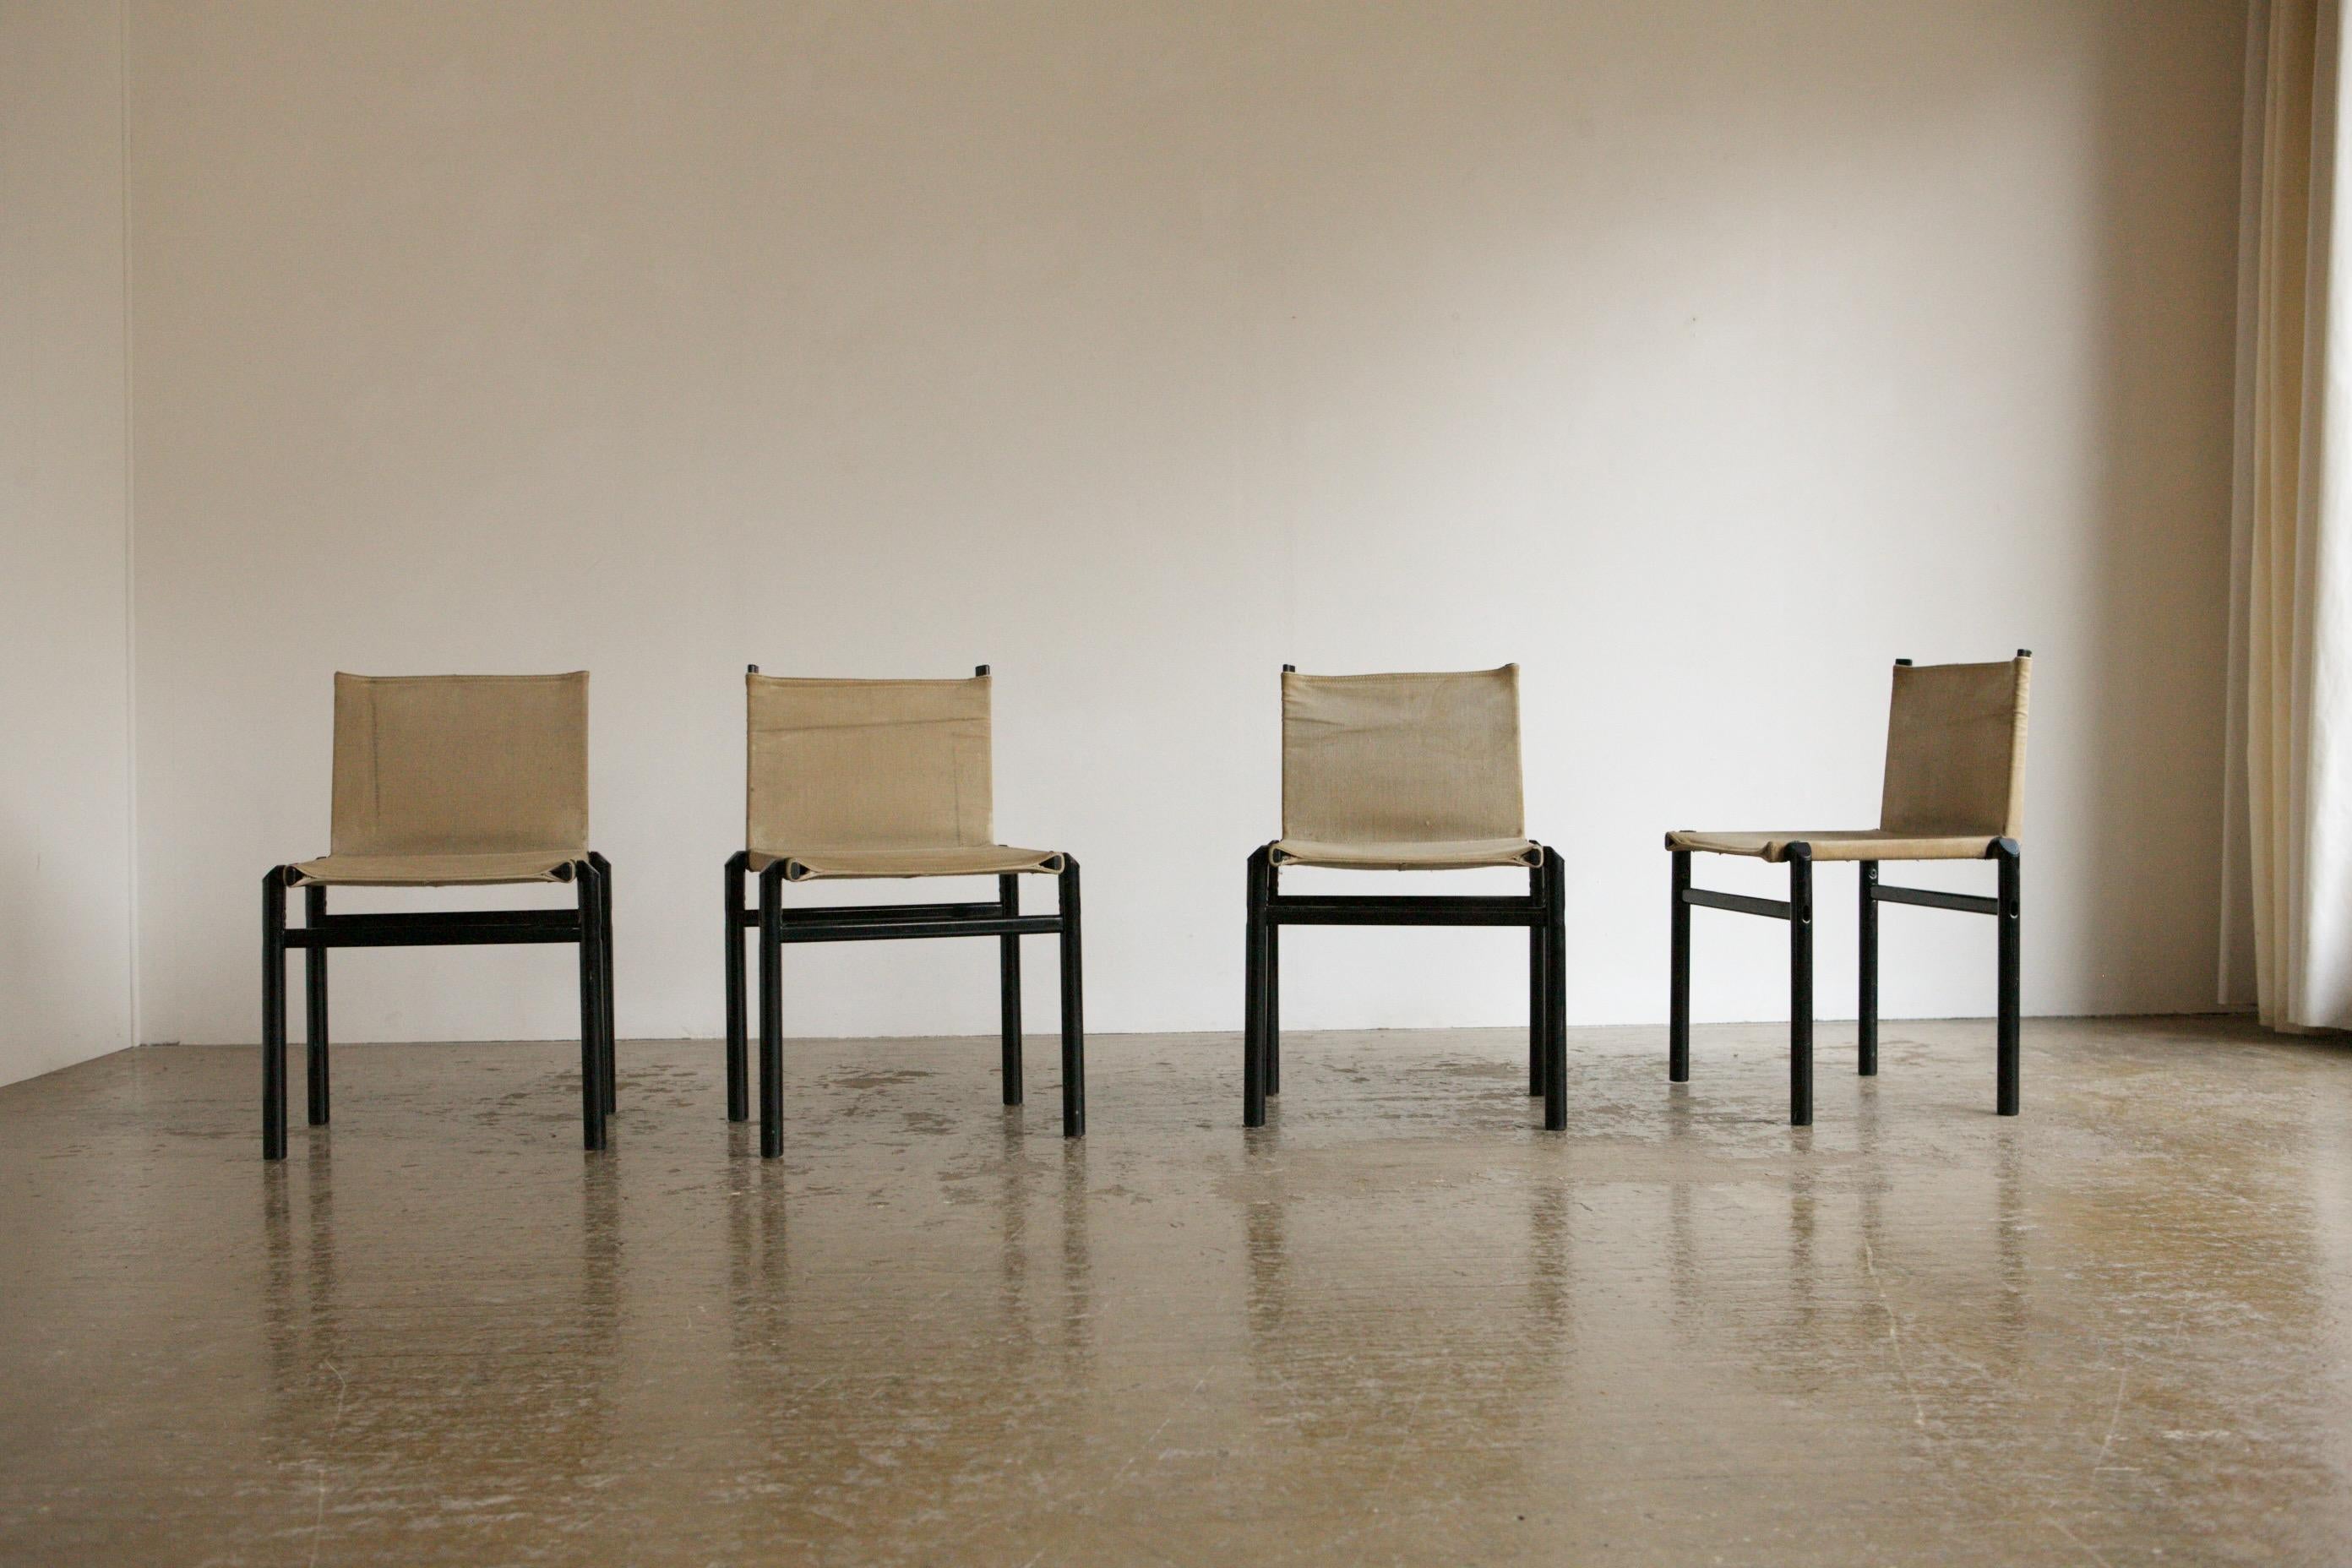 We love this neutral set of chairs in steel and canvas by the giants of 1970's Italian design, Afra and Tobia Scarpa. The Mastro chairs have a light black steel frame in black and they are upholstered with their original natural canvas. The chairs